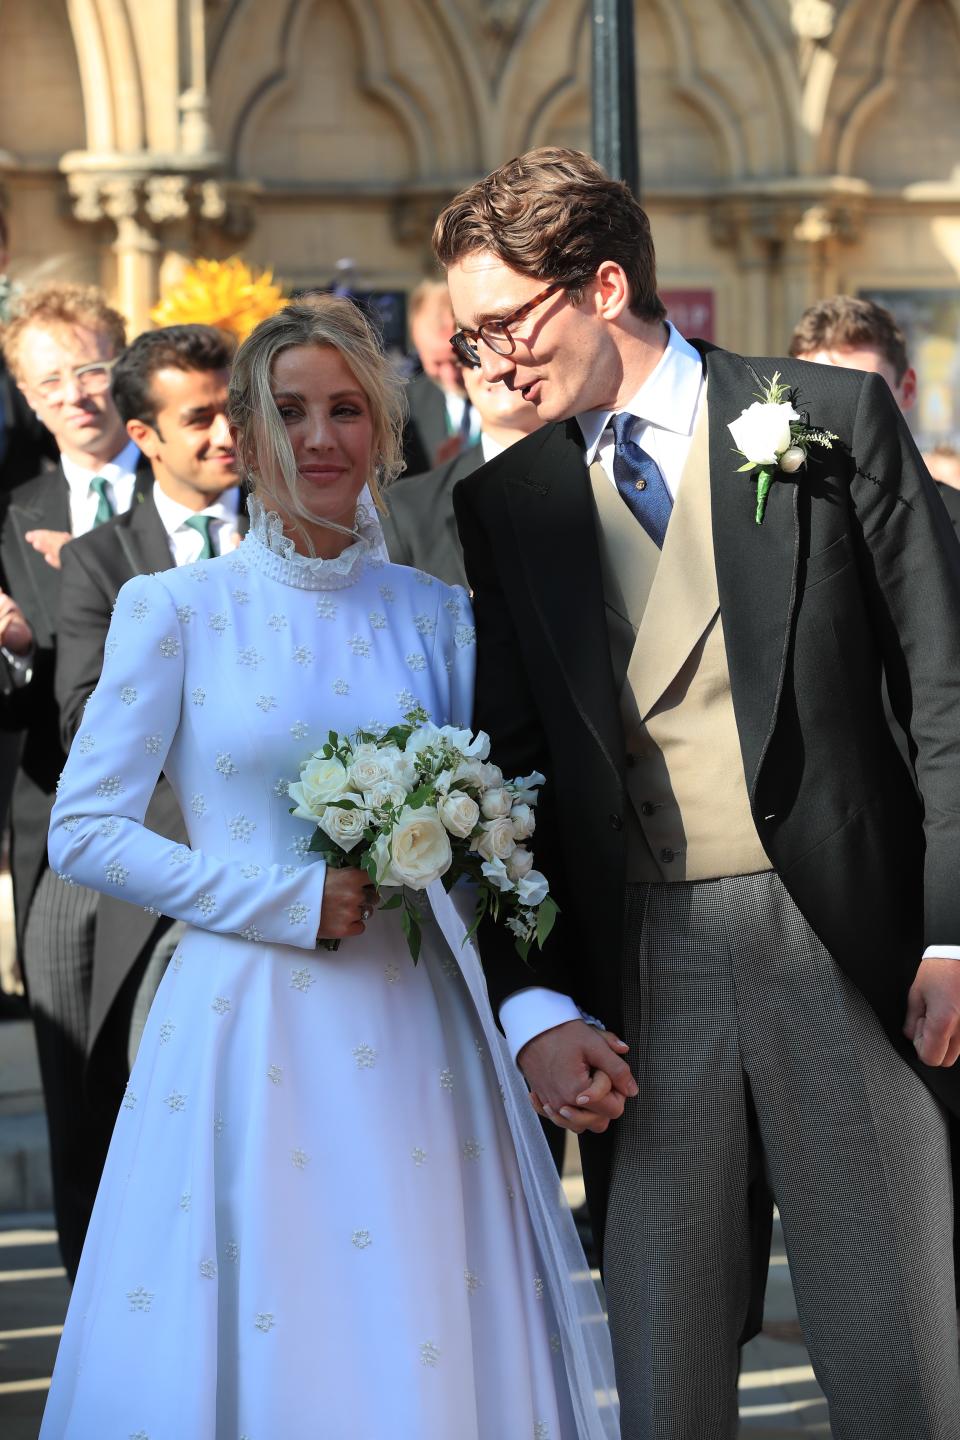 Singer Ellie Goulding and Caspar Jopling got married in an elegant wedding in York, England, on Saturday, August 31. The singer, who looked stunning in silk crepe wedding dress by Chloé, exchanged vows with the art dealer inside the historic York Minster in front of family and friends, including Katy Perry, Orlando Bloom, and Sienna Miller. Royals Princess Eugenie, Princess Beatrice, and Sarah, Duchess of York, were also in attendance.